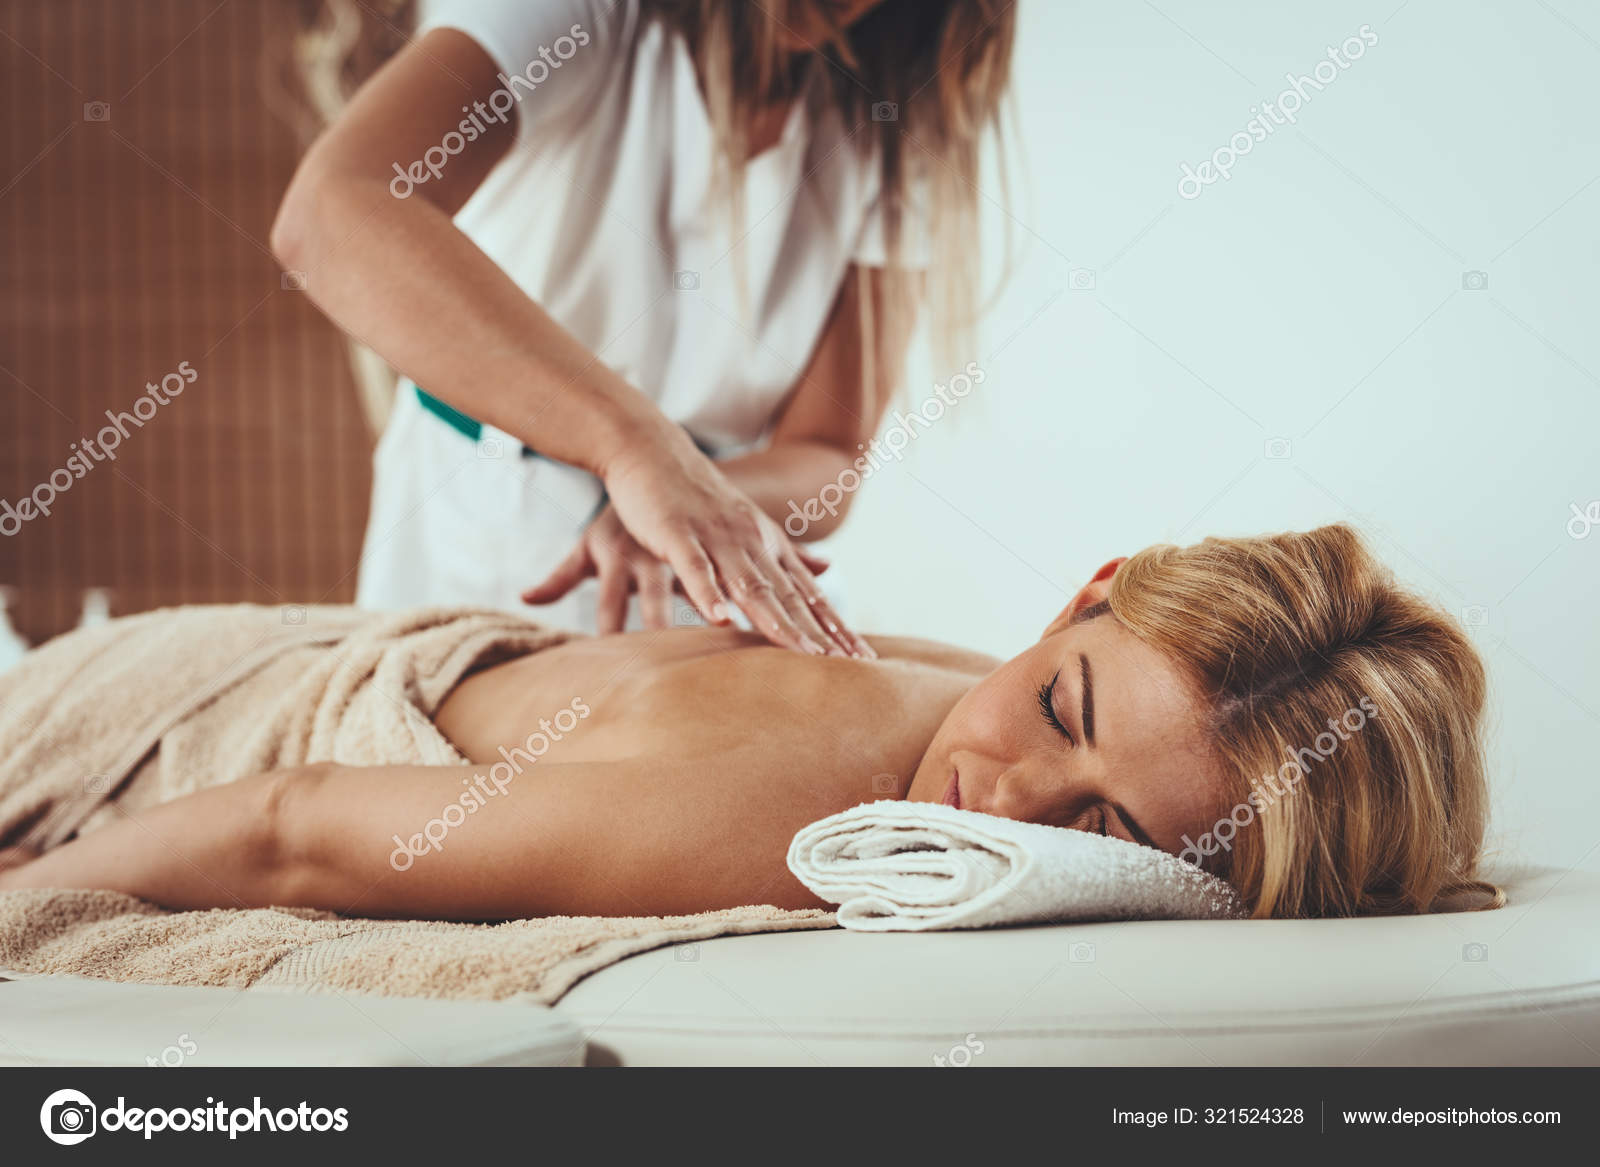 Young woman receiving a back massage in a spa center stock photo